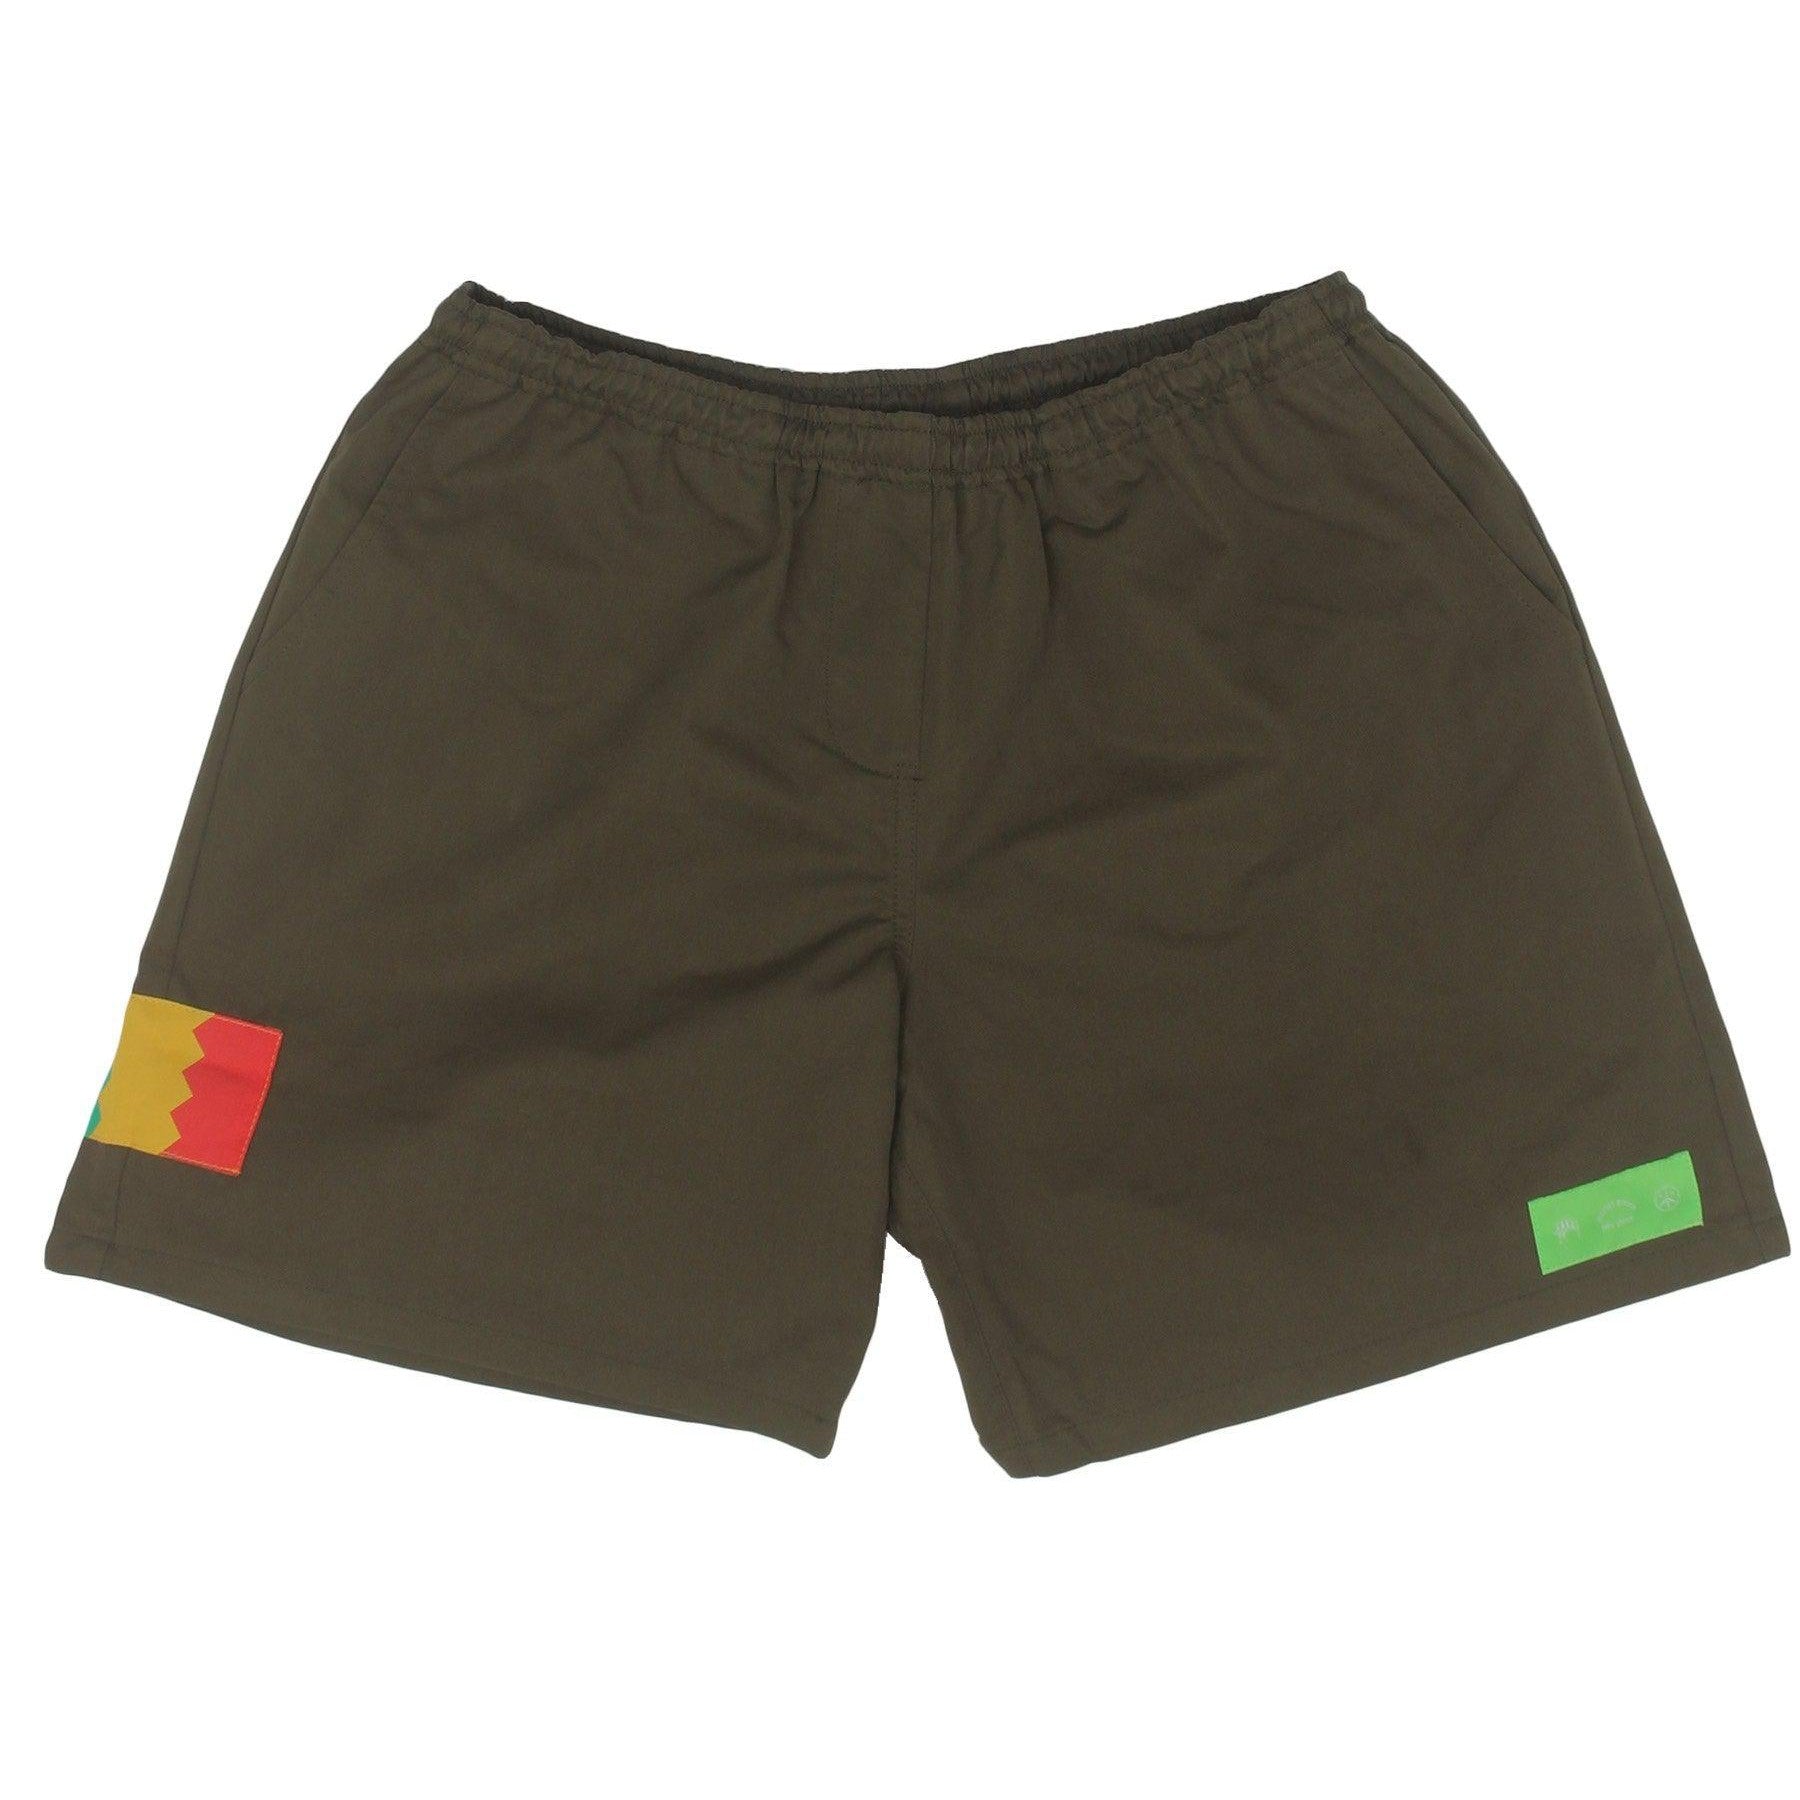 Patch Shorts - Olive-Mister Green-Mister Green